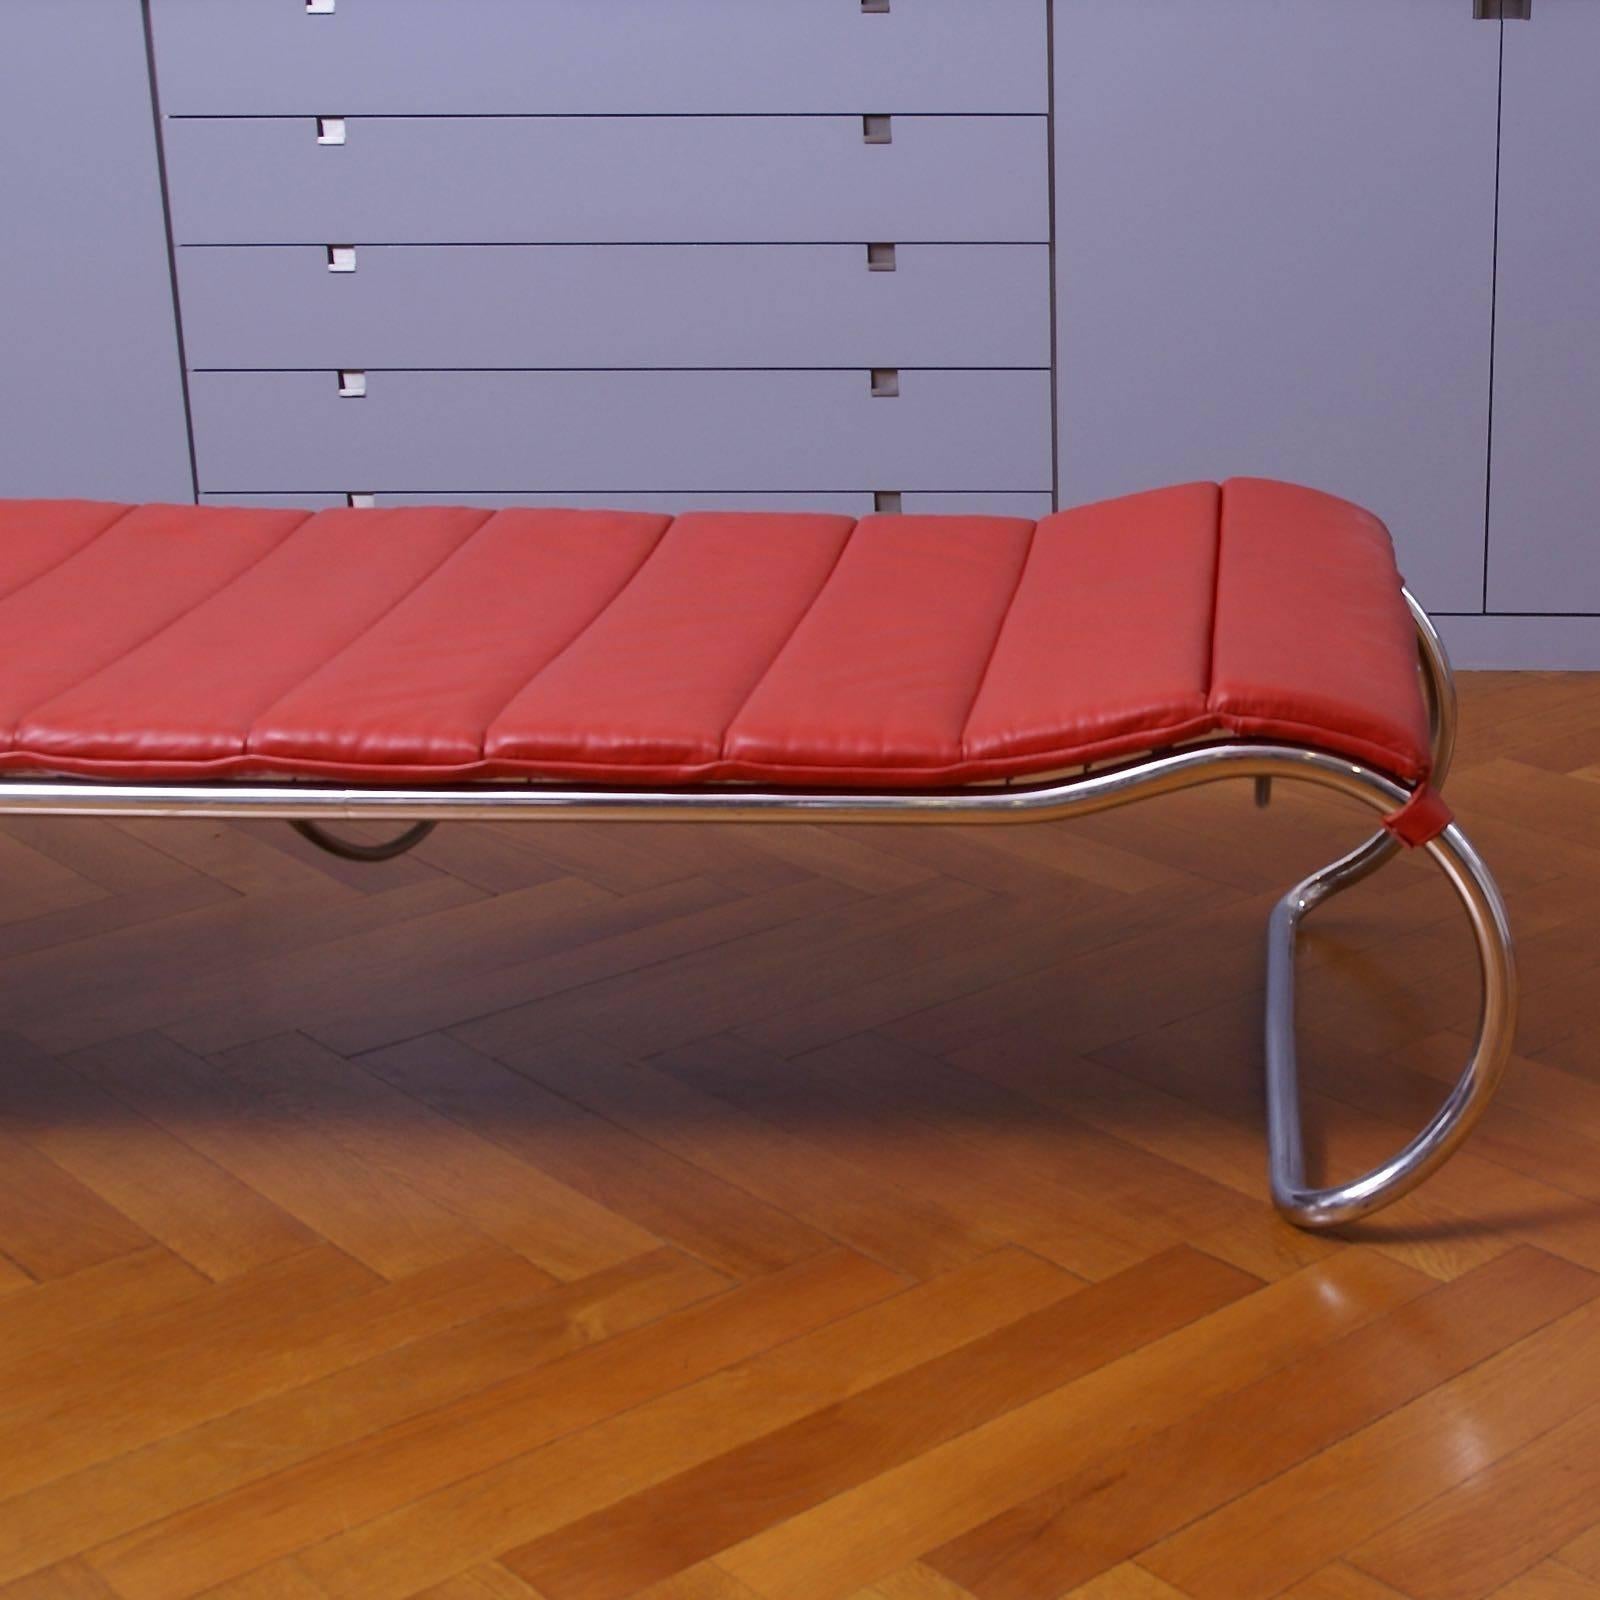 Rare Chrome and Leather Bauhaus Thonet LS 23 Daybed by Anton Lorenz For Sale 3